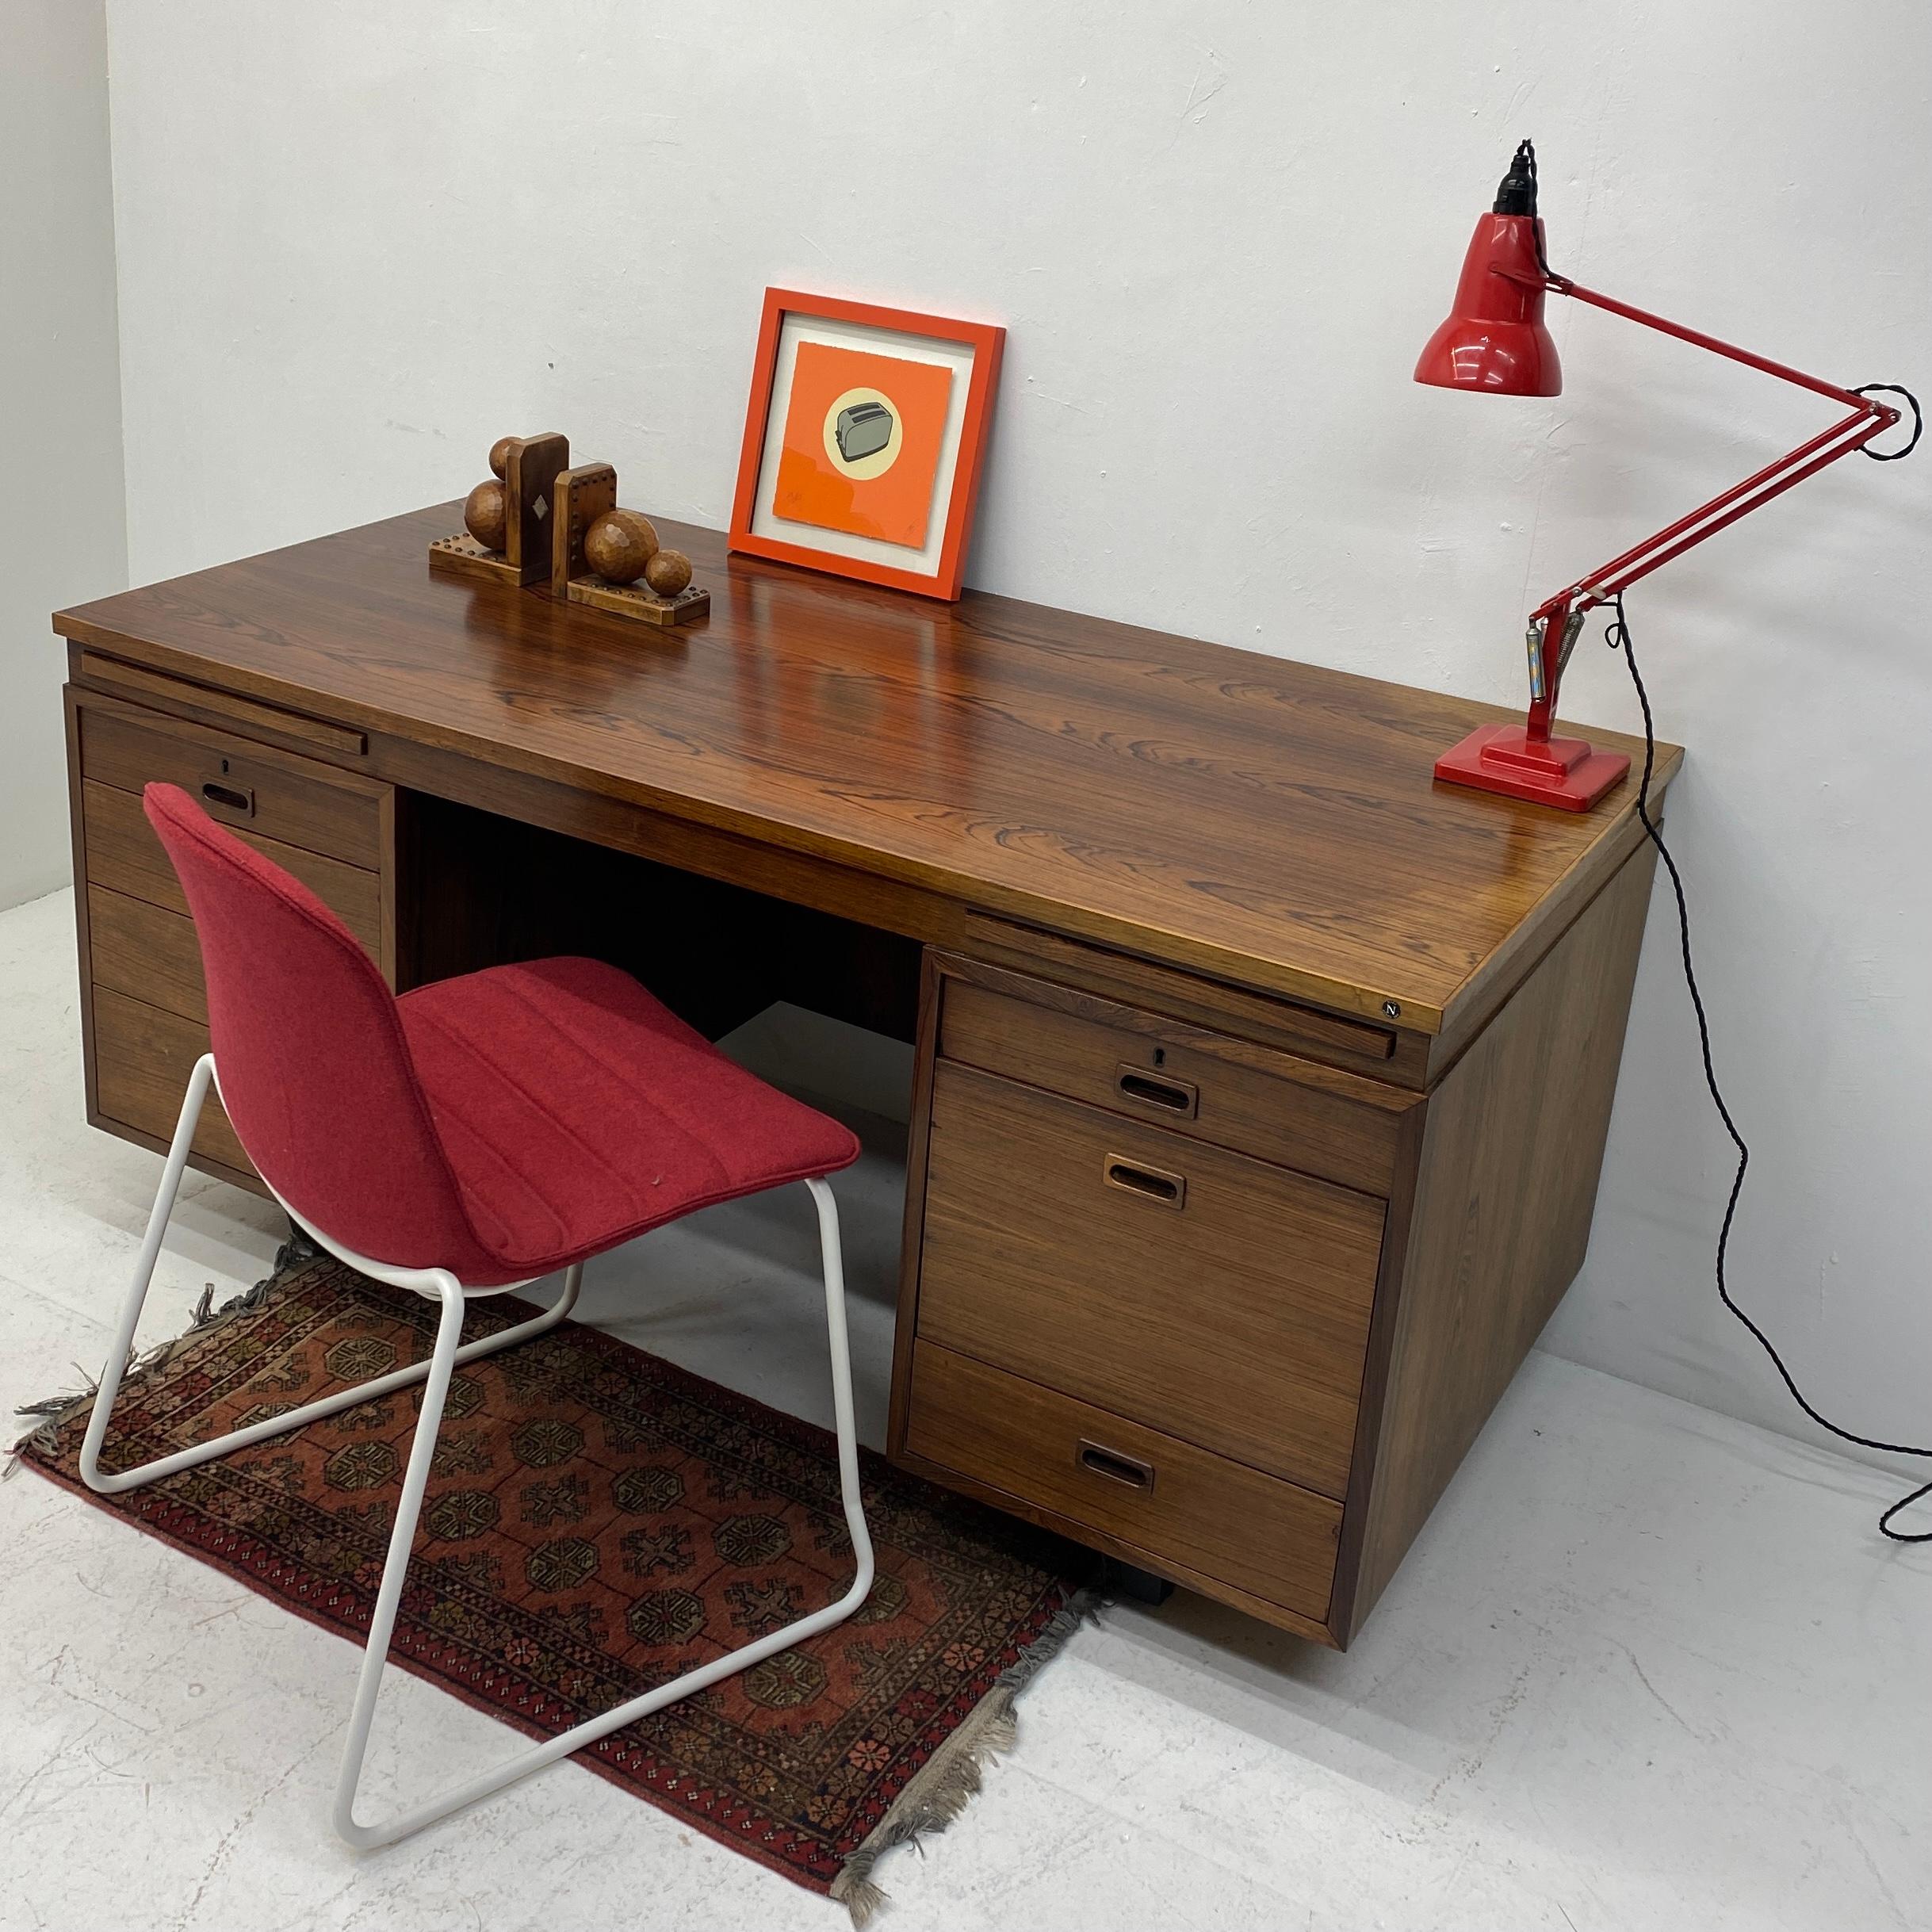 A stunning midcentury Brazilian rosewood executive desk. The desk is designed by Danish Sigvard Bernadotte. It is constructed from solid rosewood in beautiful tones & grain. It oozes quality. The desk has two desk tidy pullouts for stationary, seven